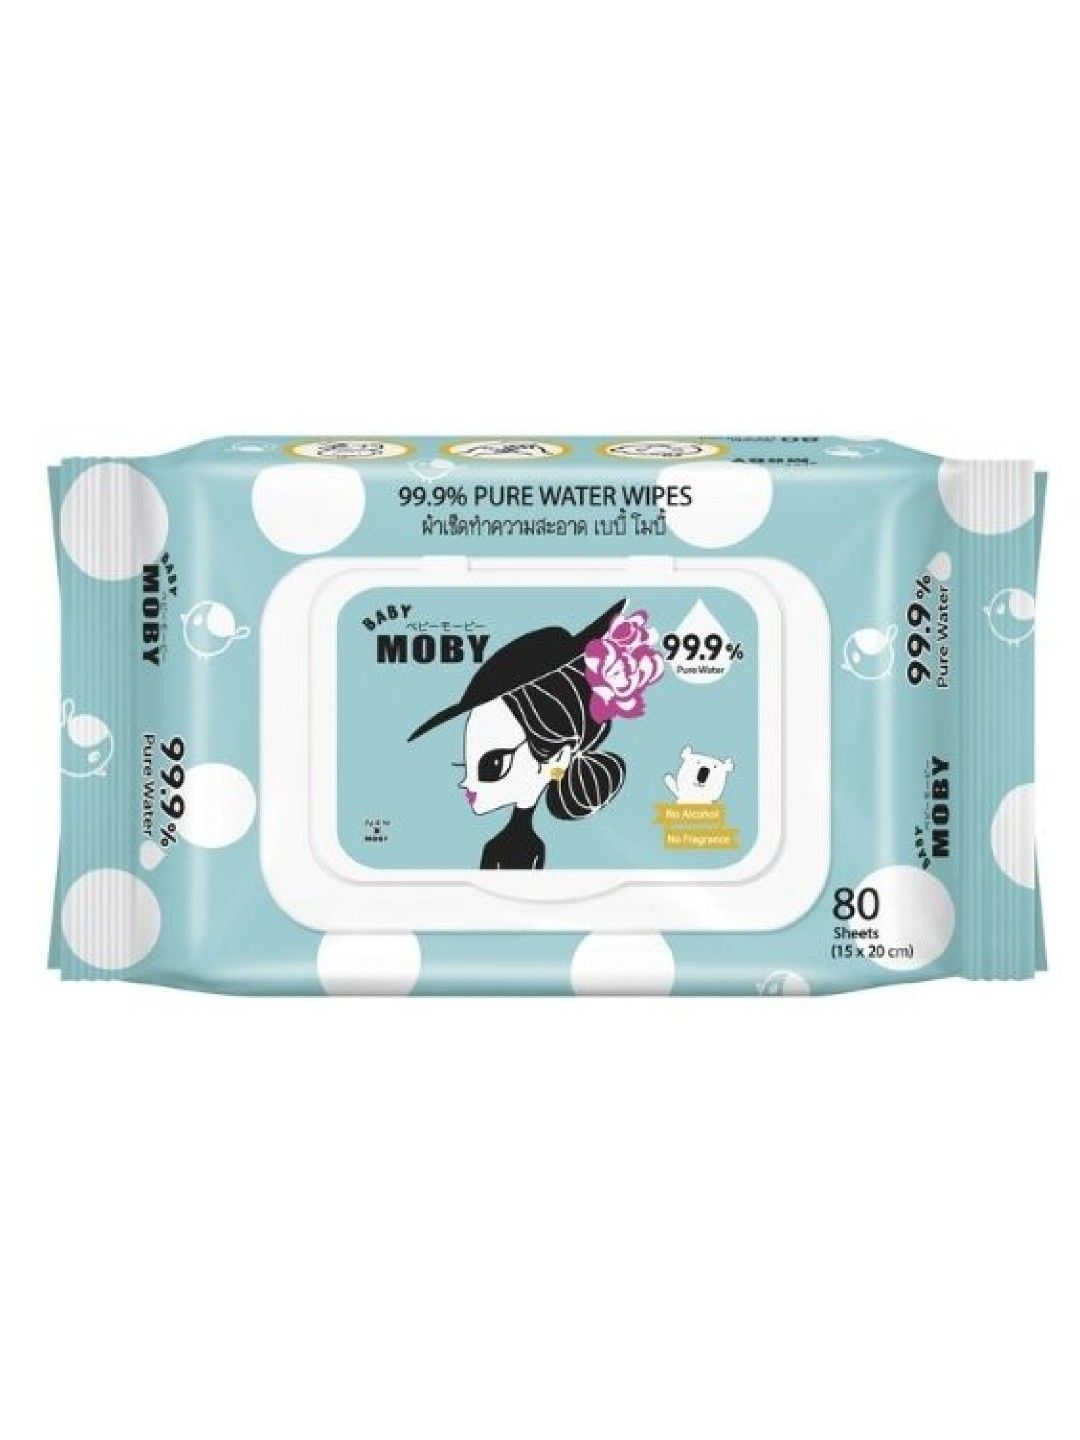 Baby Moby Limited Edition Parn x Moby 99.9% Pure Water Wipes (80 sheets) (Blue- Image 1)